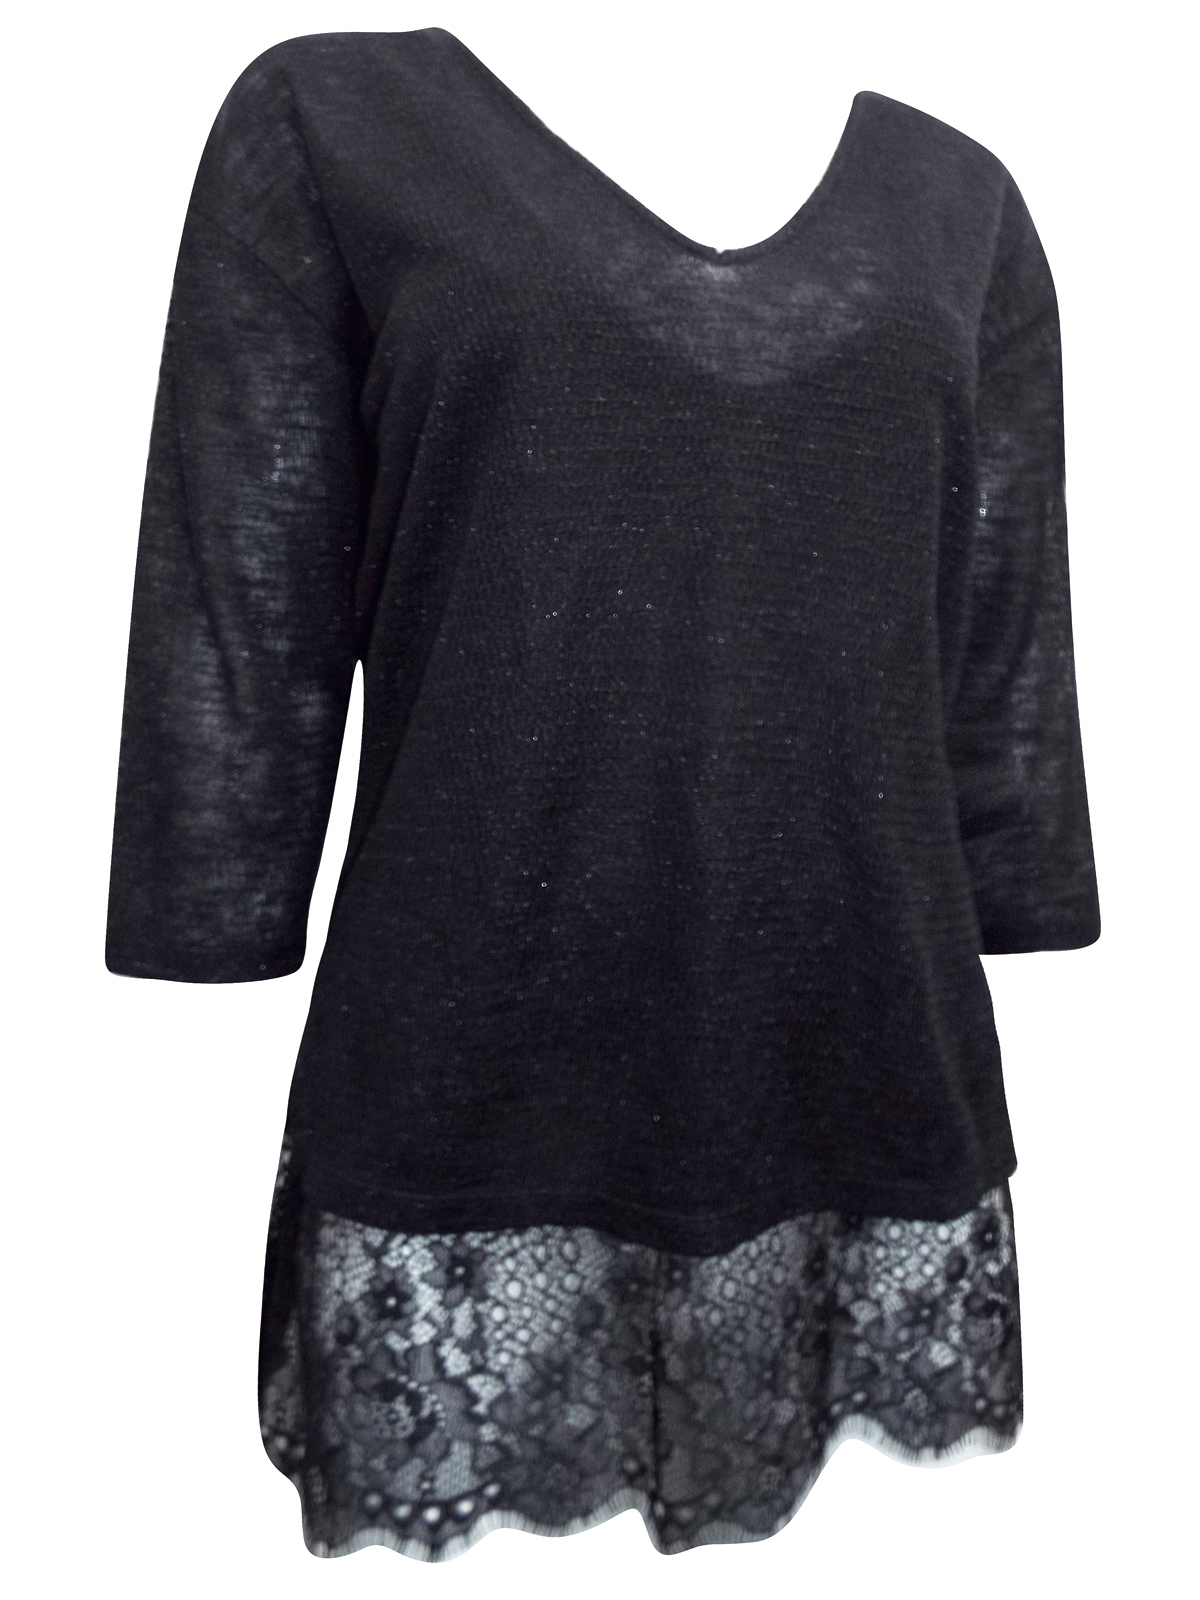 N3xt BLACK 2-in-1 Sparkle Lace Layer 3/4 Sleeve Top - Size 8 to 20